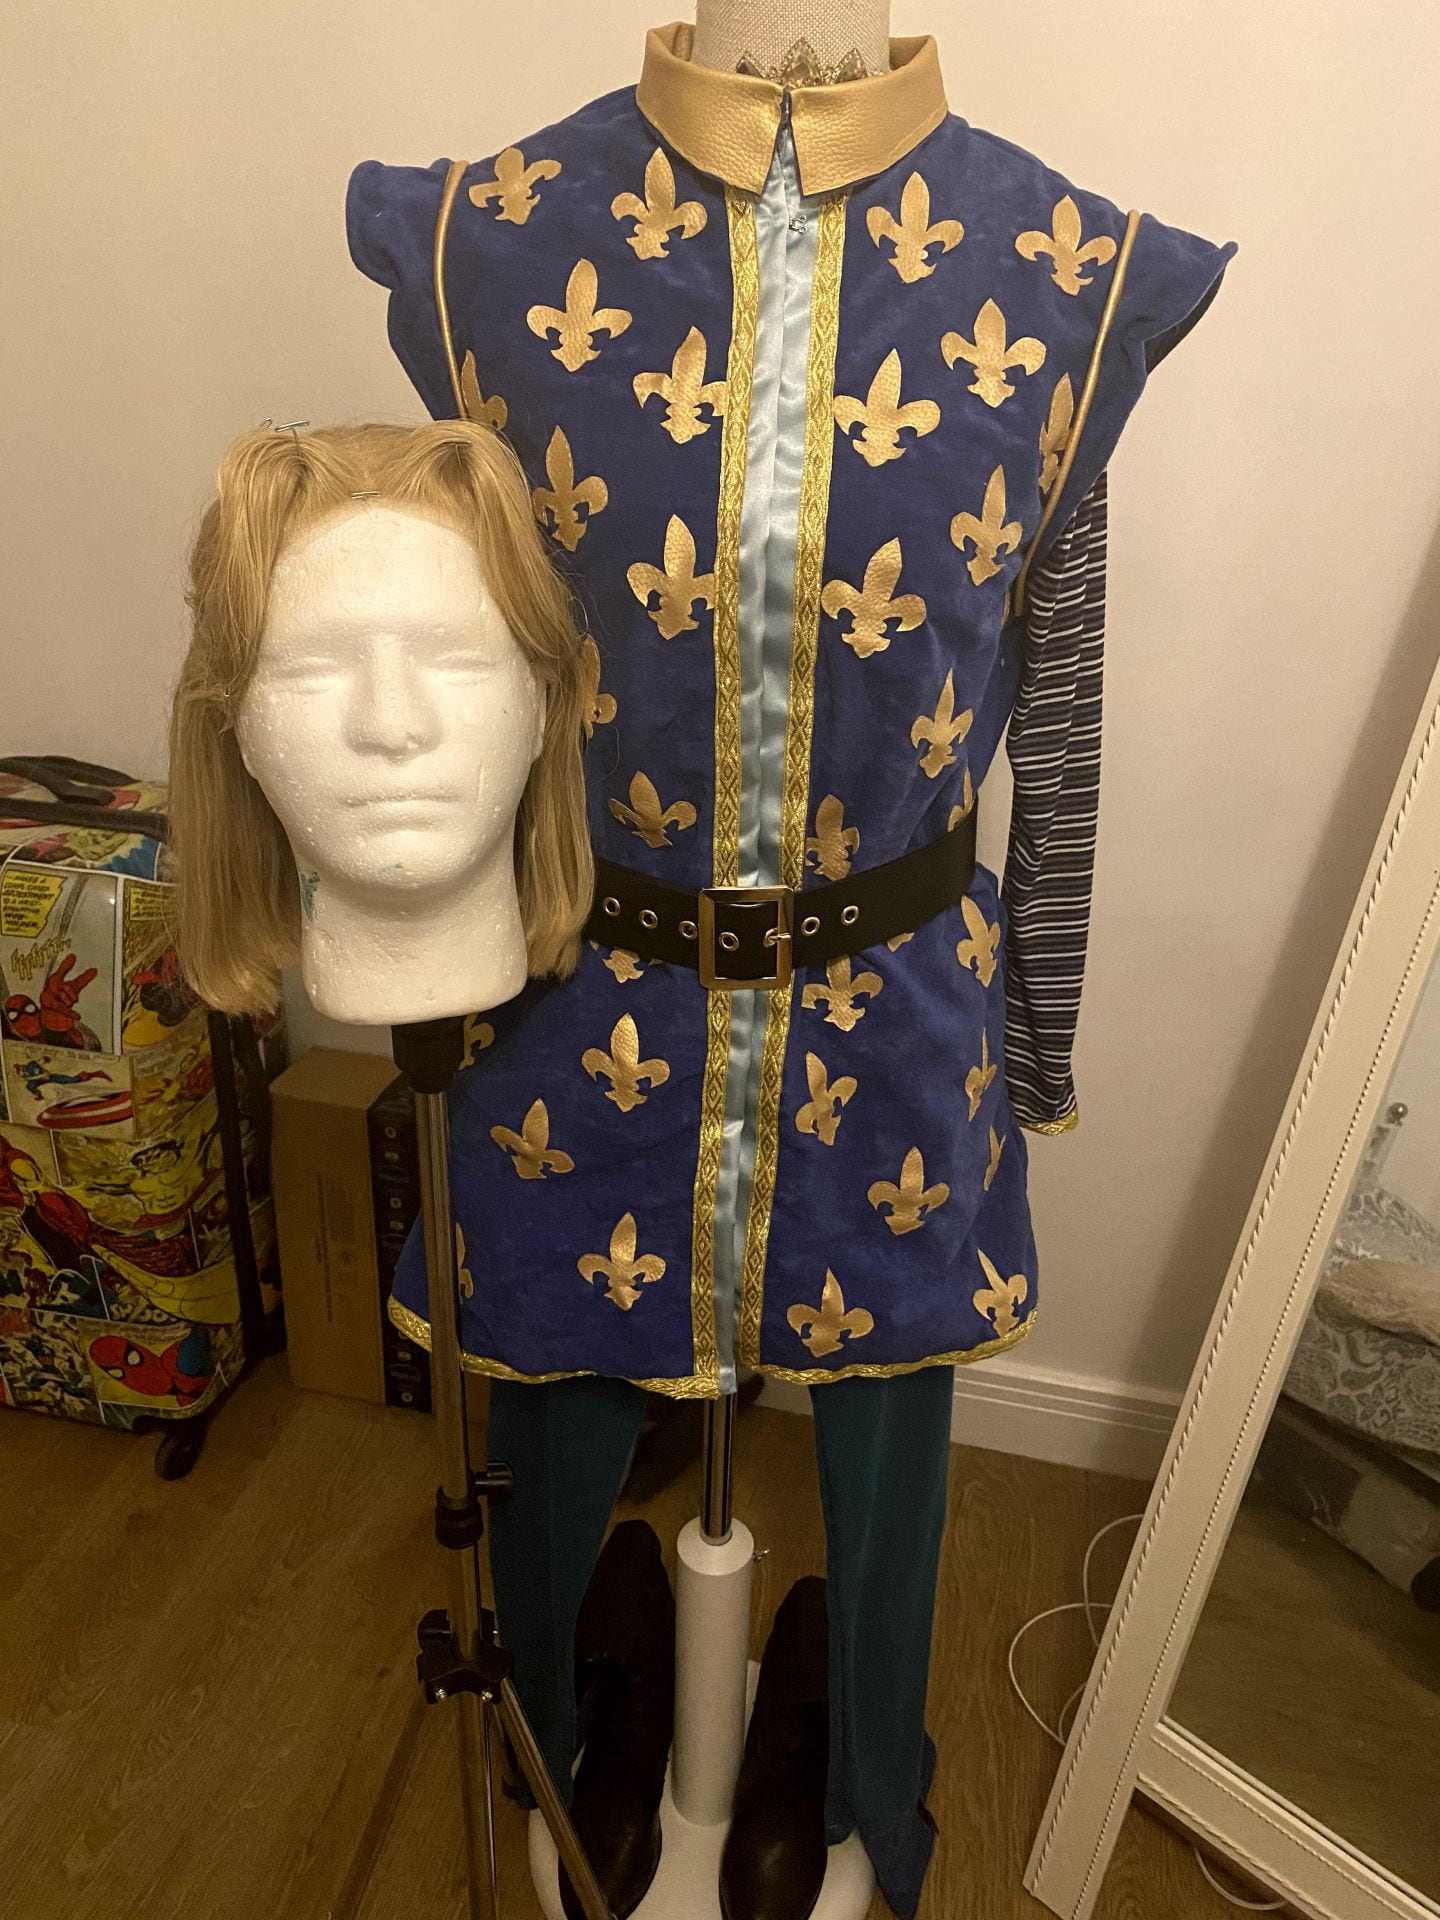 Full look at the price charming costume. Includes blonde wig, main blue bodice with gold detailing, blue leggings, black boots with a blue and gold trim and a black belt.